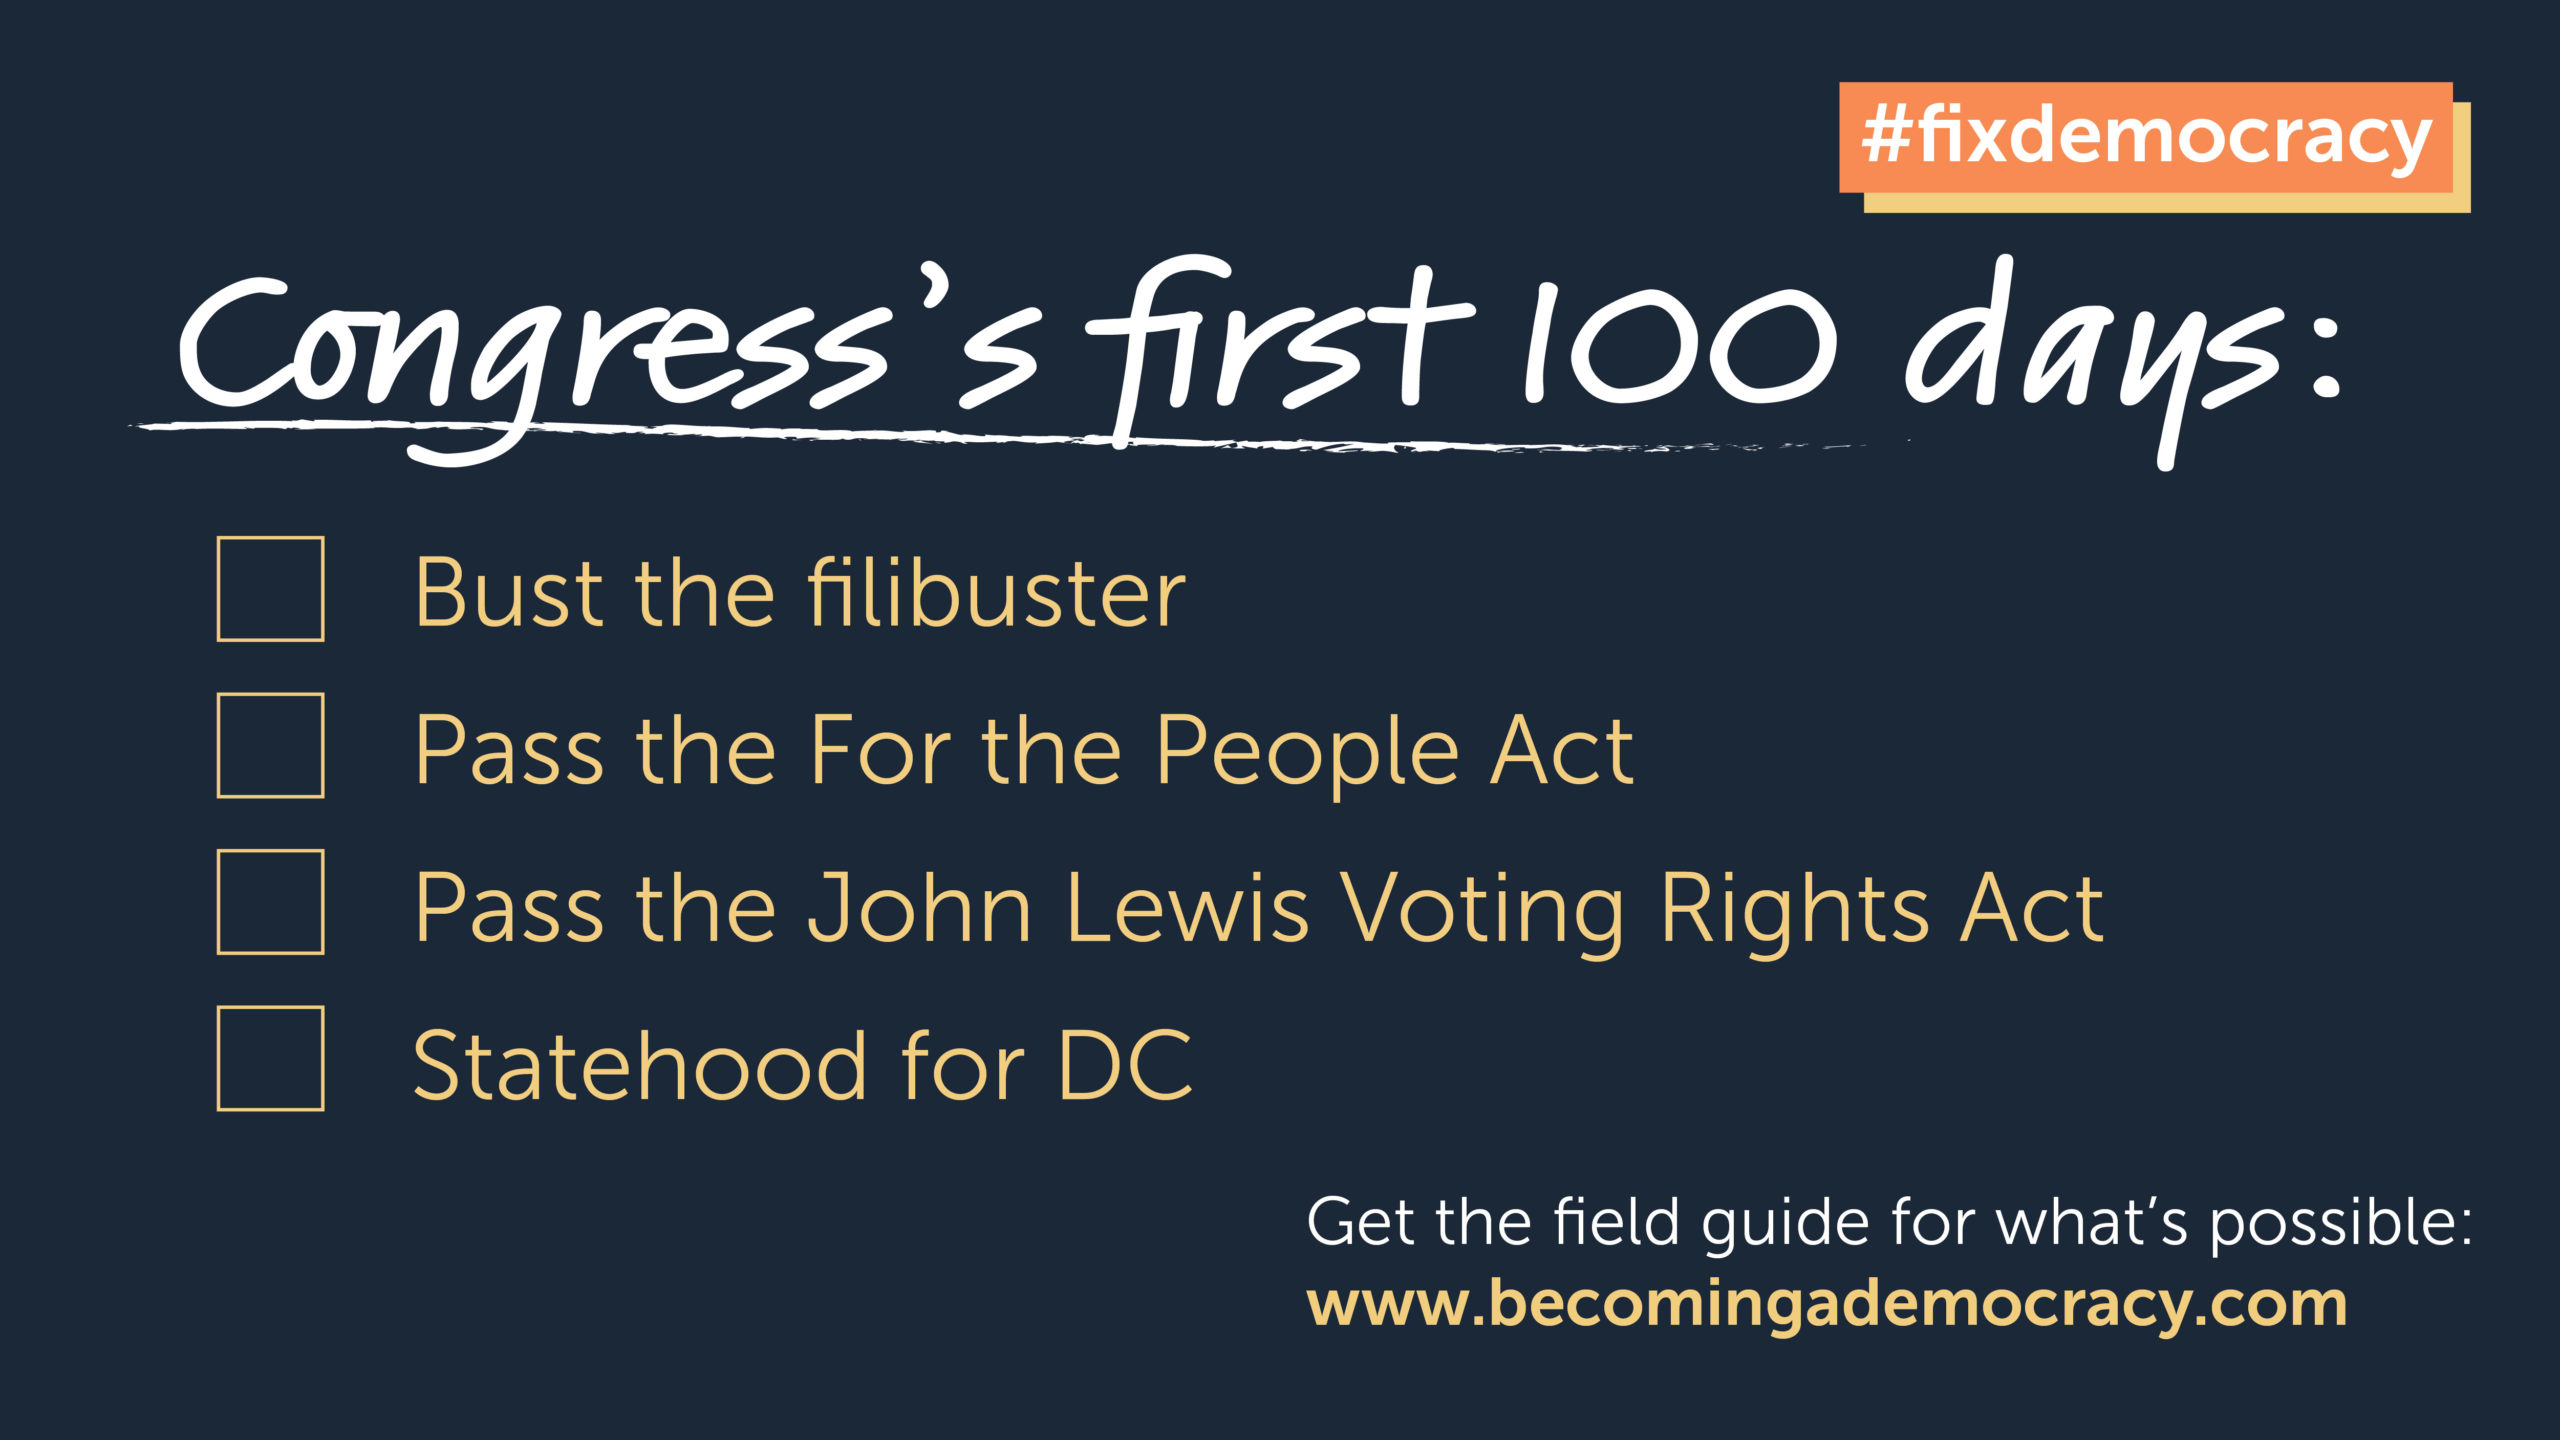 Democrats hold control of the House, Senate, and White House. What should they do in their first 100 days? Here's Sightline's checklist of priorities: 1) bust the filibuster, 2) pass the For the People Act, 3) pass the John Lewis Voting Rights Act, 4) statehood for DC